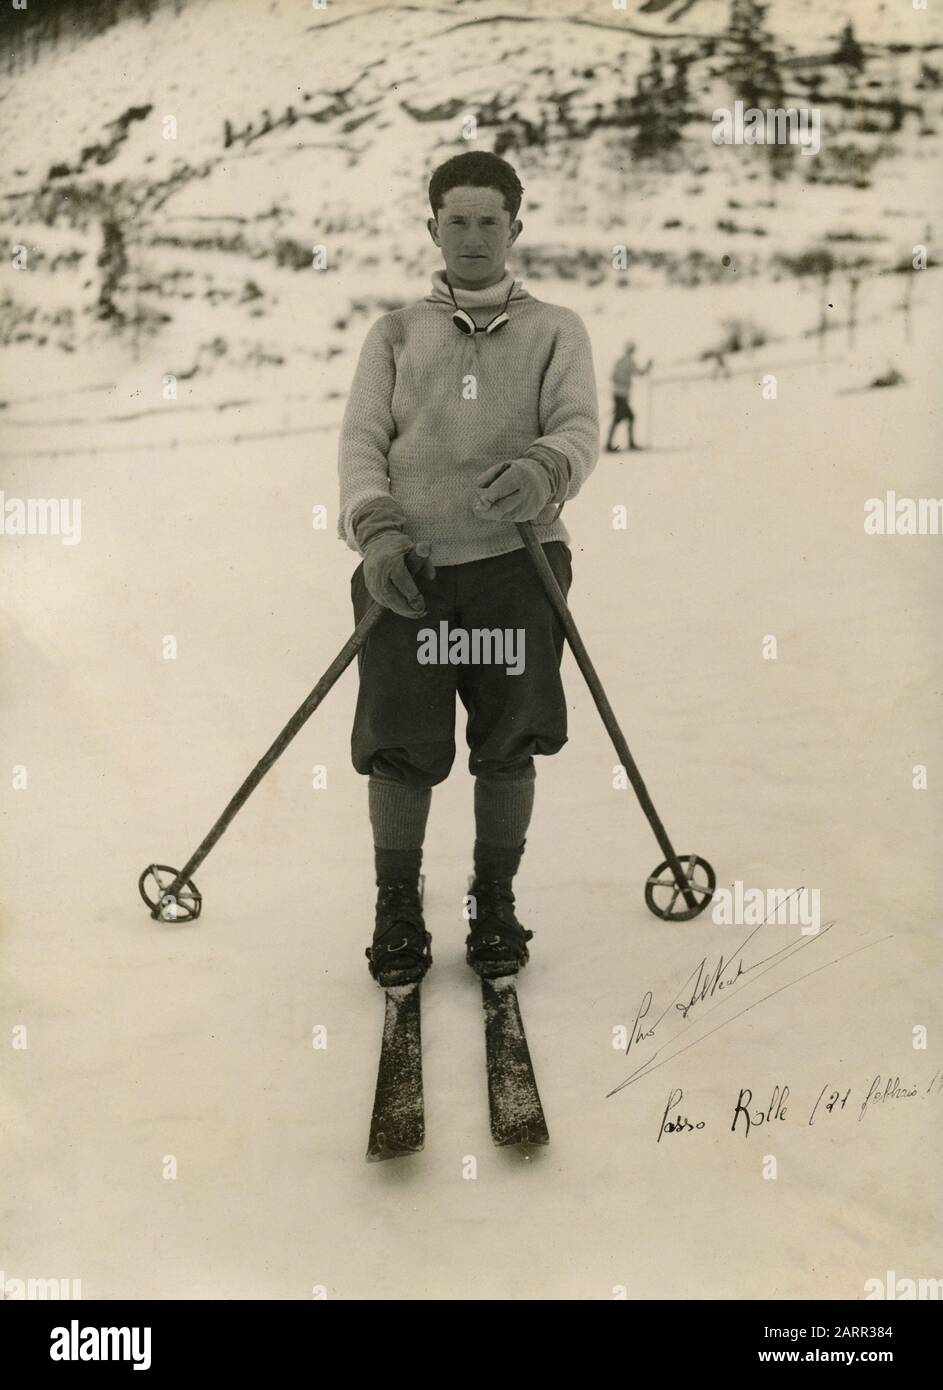 Skier on the snow at Passo Rolle, Italy 1931 Stock Photo